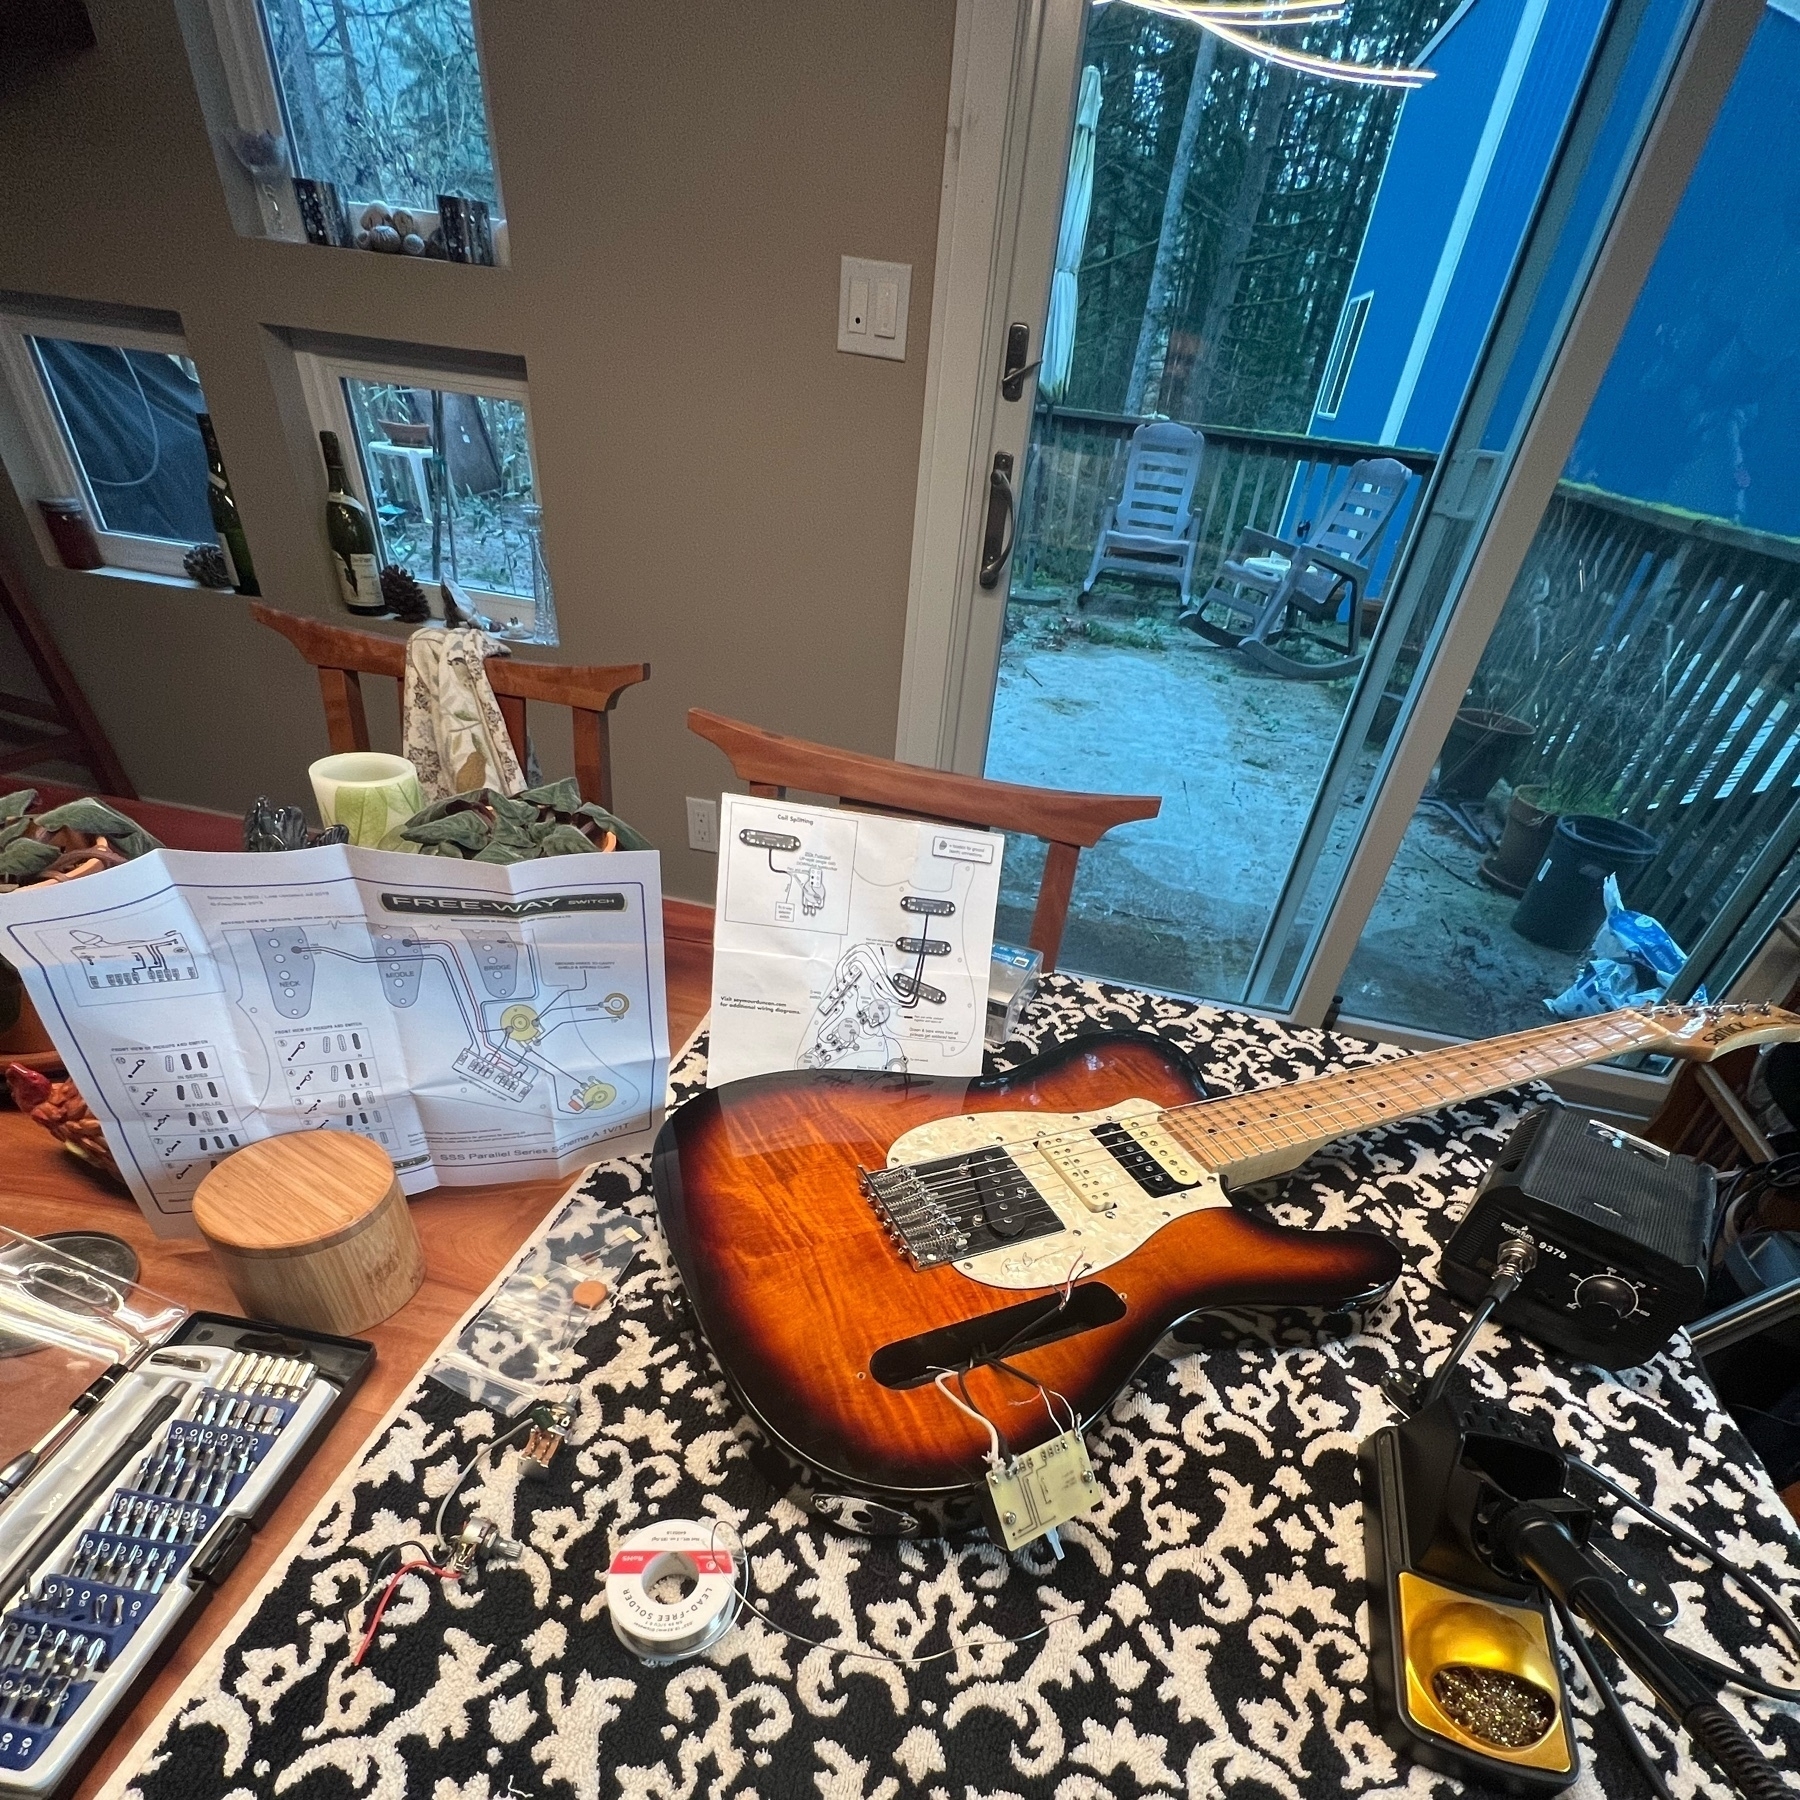 Electric guitar's electronics being assembles on a table